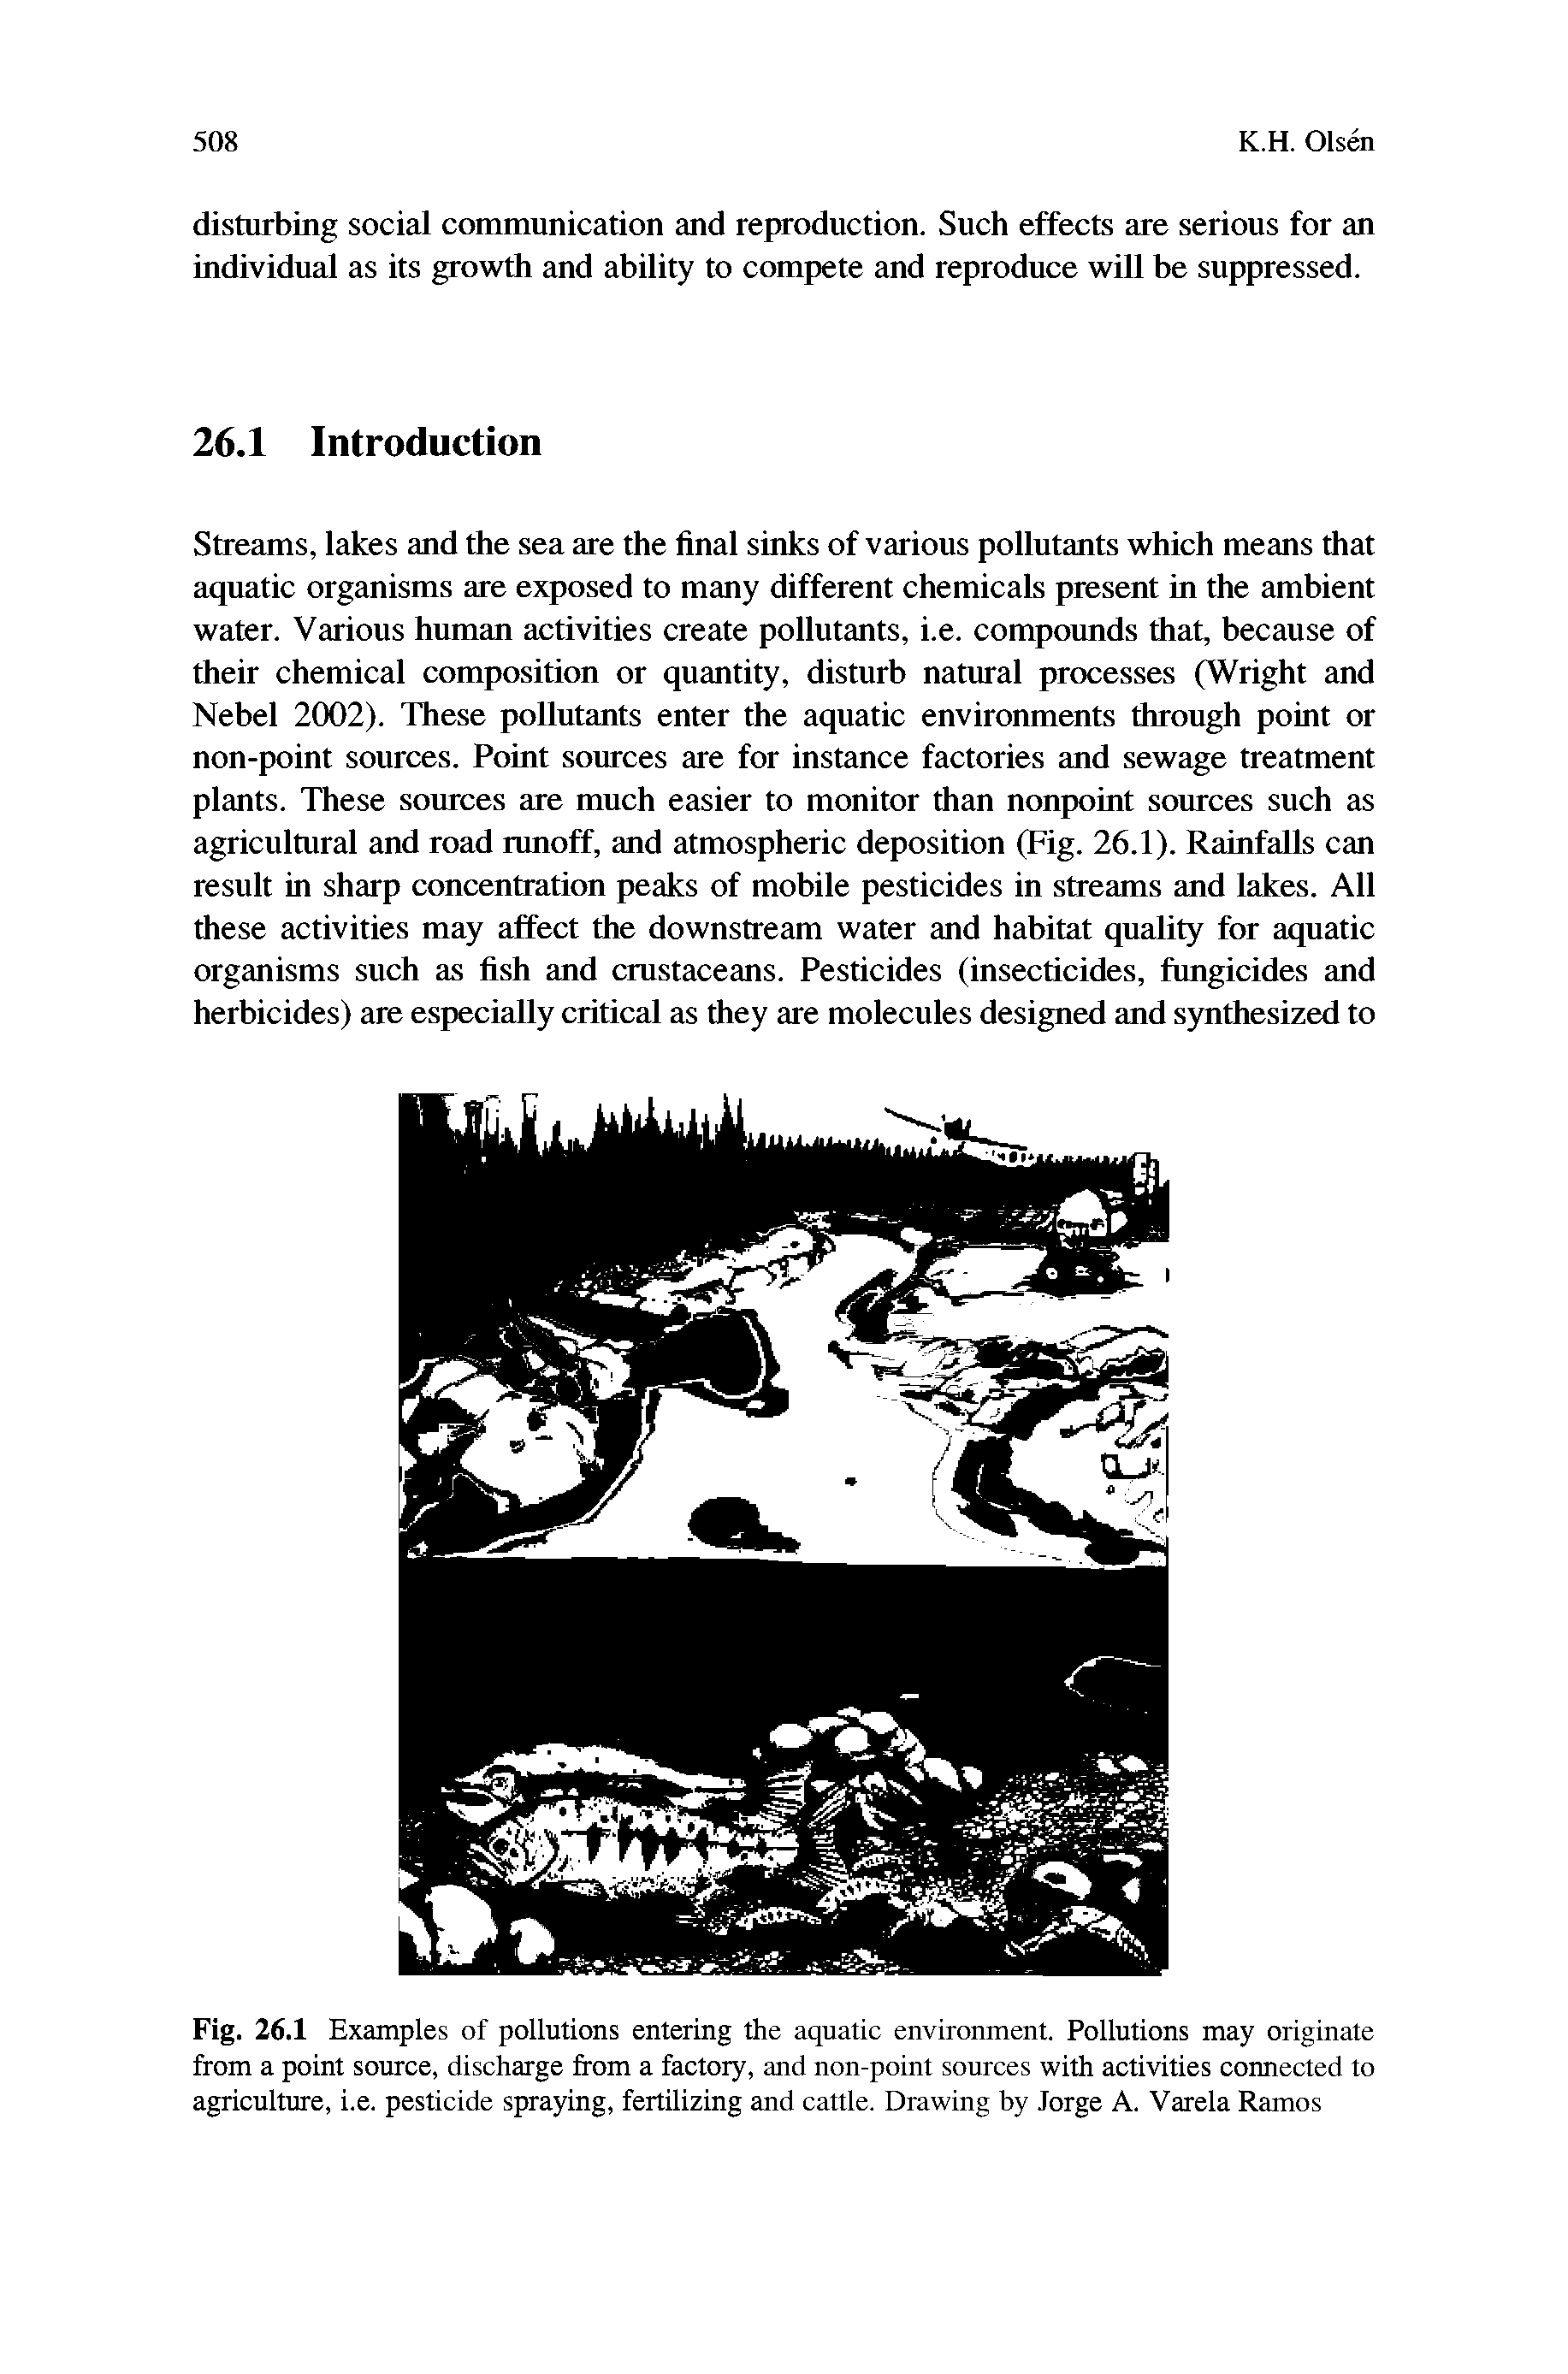 Fig. 26.1 Examples of pollutions entering the aquatic environment. Pollutions may originate from a point source, discharge from a factory, and non-point sources with activities connected to agriculture, i.e. pesticide spraying, fertilizing and cattle. Drawing by Jorge A. Varela Ramos...